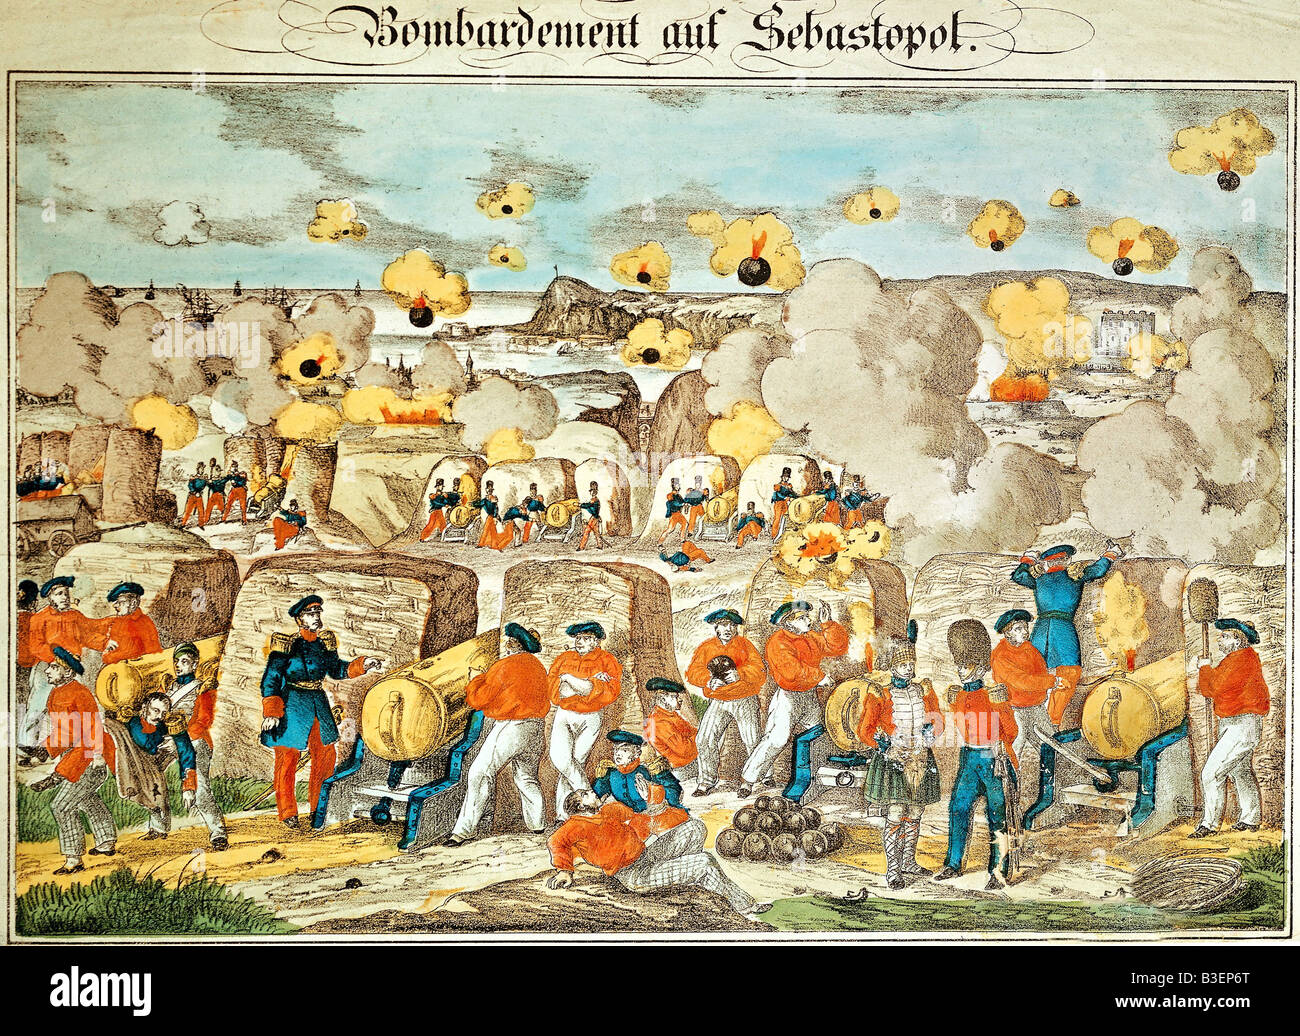 Crimean War 1853 - 1856, siege of Sevastopol 2.9.1854 - 9.9.1855, barrage, coloured engraving, Oehmicke publishing Neuruppin 1855, 21,8x33 cm, privat collection, historic, historical, bombardment by British and French historic, historical, 19th century, artillery battery, combat, artillery of Royal Navy, emplacement, attack, Russia, Great Britain, France, military, army, campaign, people, Stock Photo